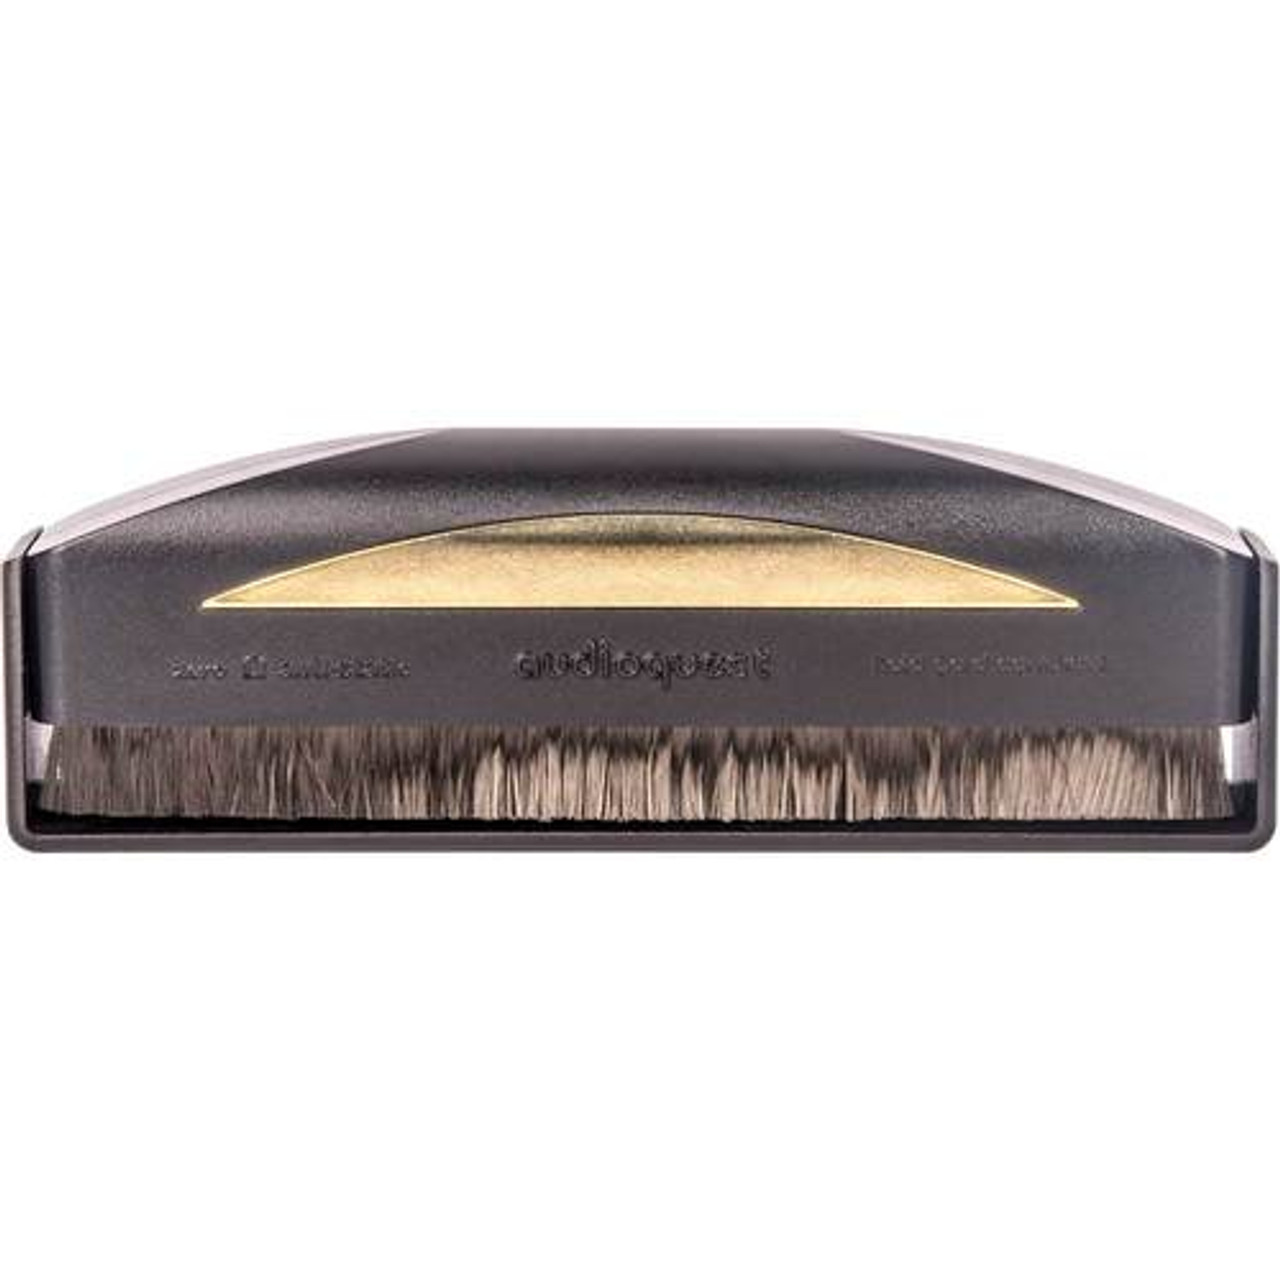 AudioQuest - Anti-Static Record Brush - Black with Gold Contacts